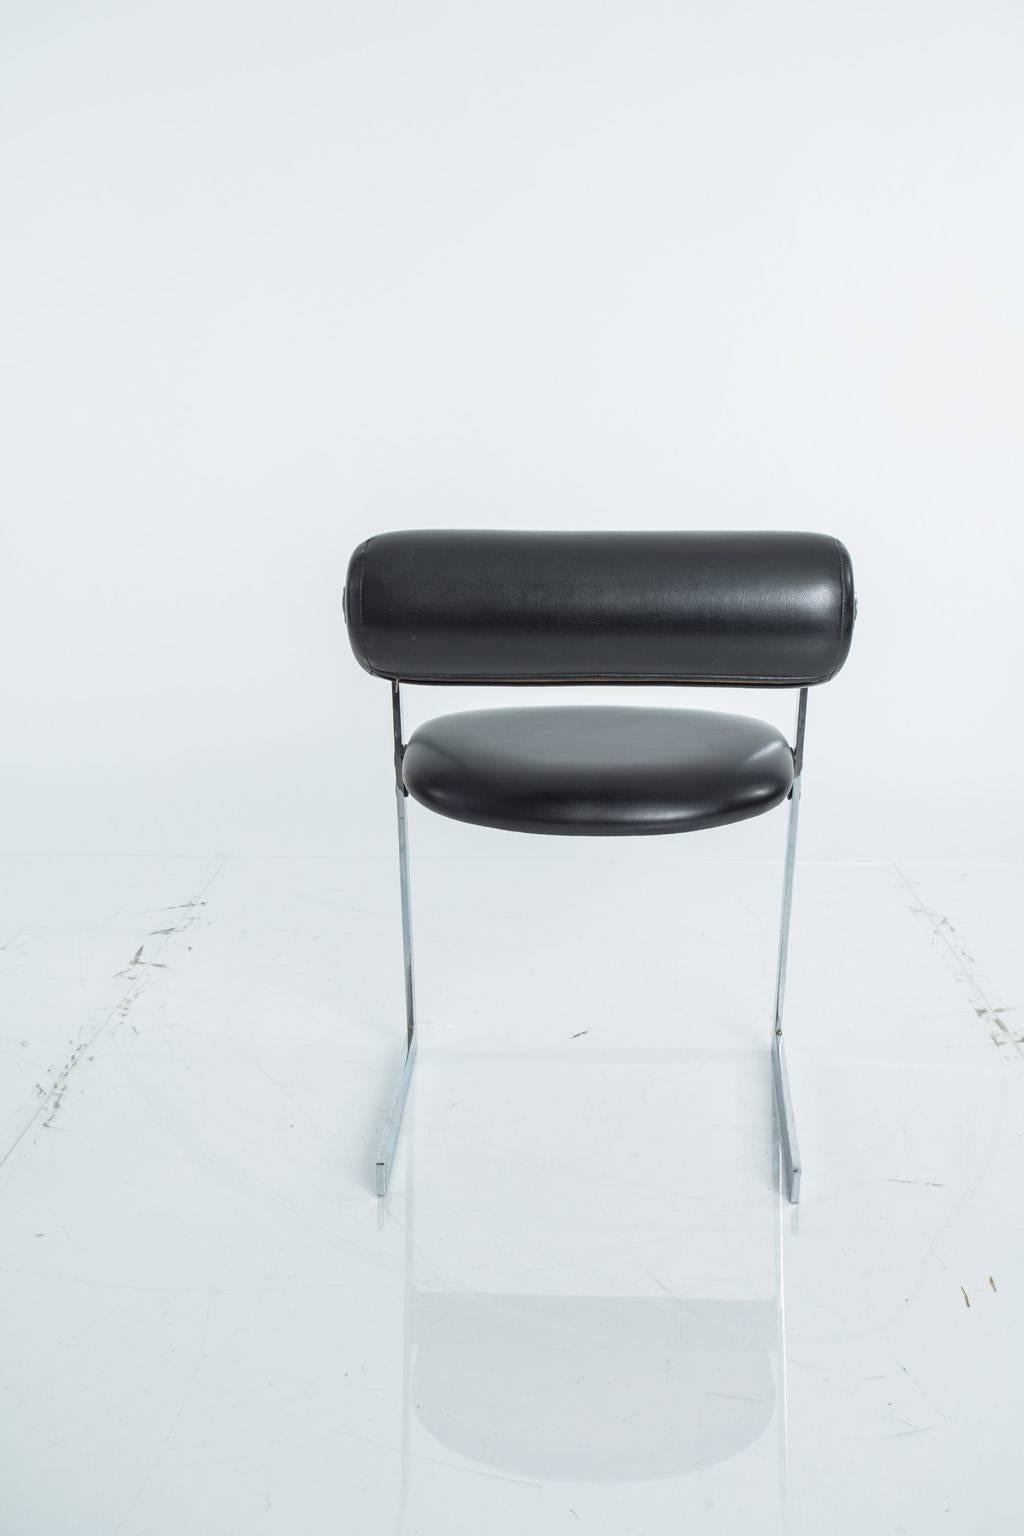 Mid-20th Century Bauhaus Black Leather Chairs  For Sale